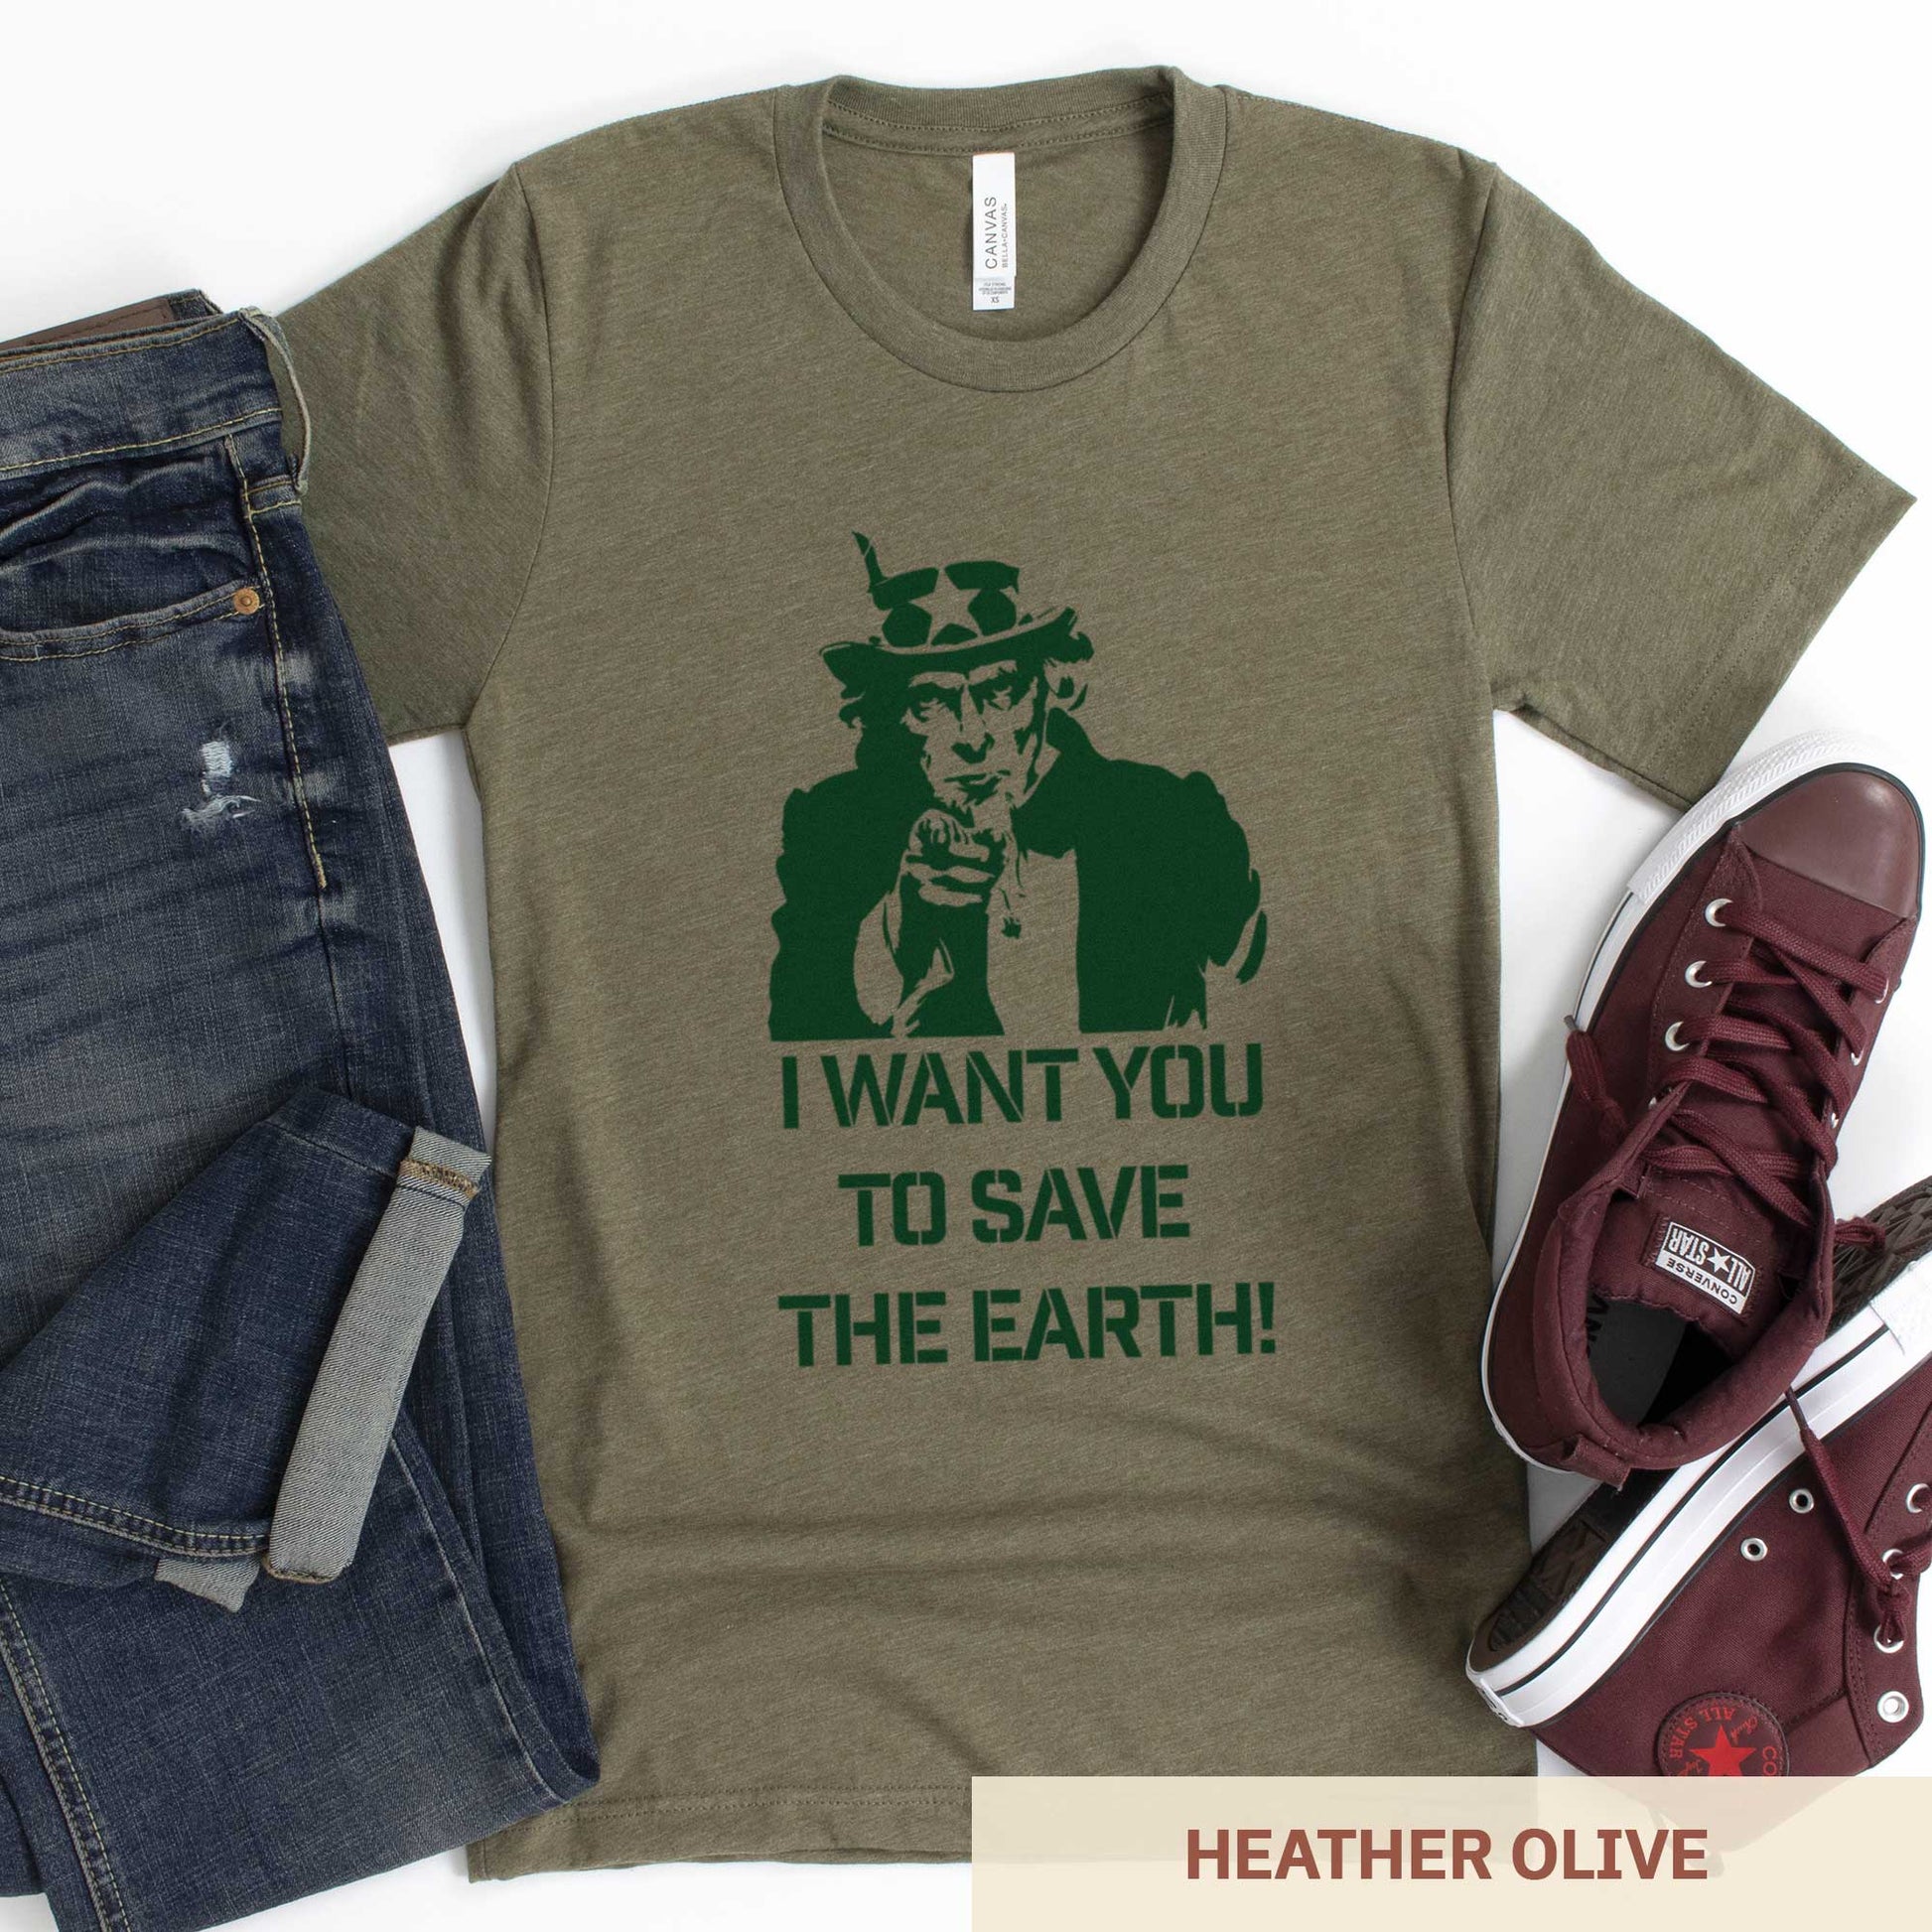 A heather olive Bella Canvas t-shirt featuring Uncle Sam and the words I want you to save the Earth.